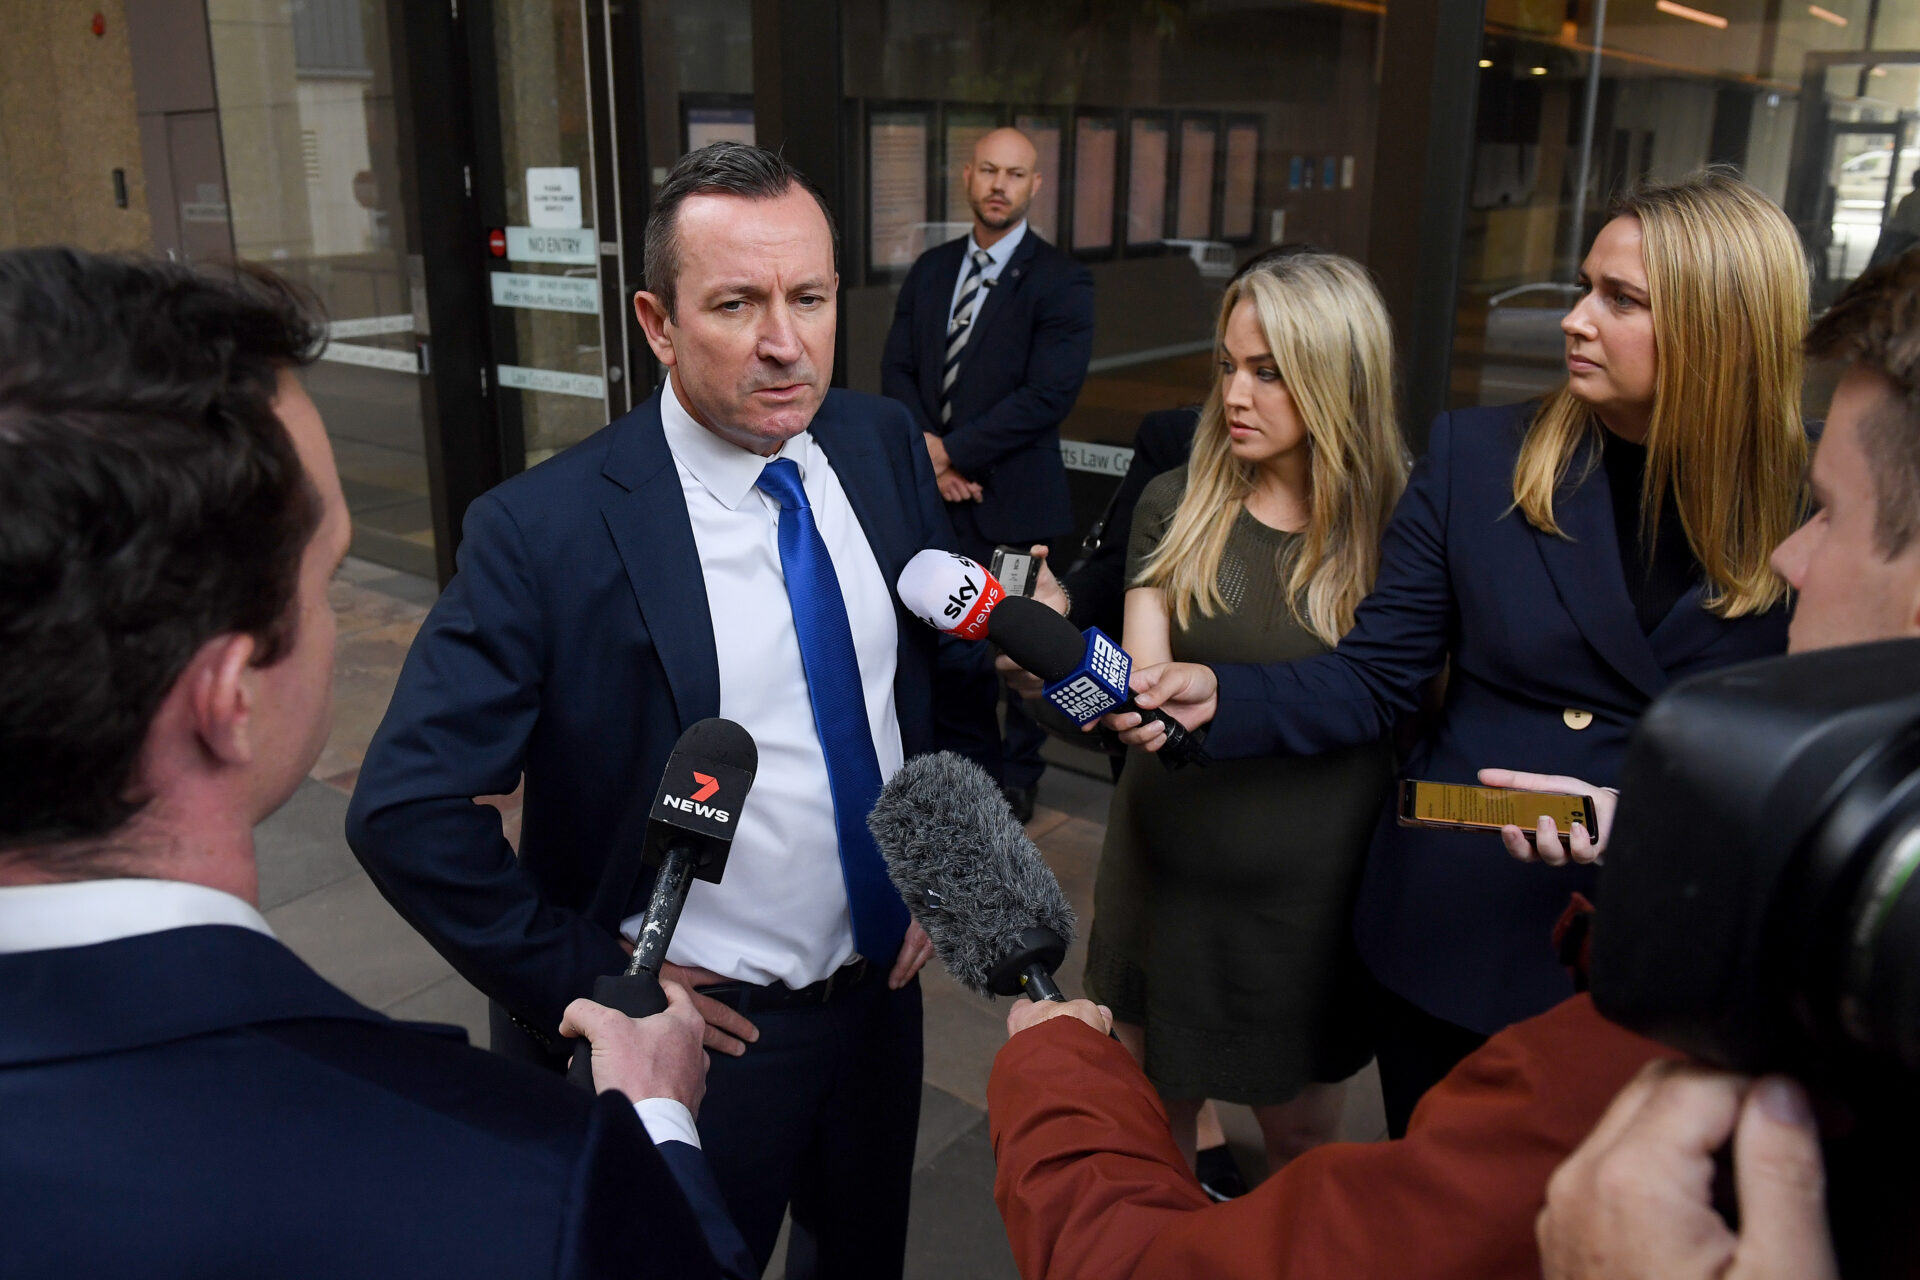 Former WA Premier Mark McGowan (left) speaks to the media as he arrives at the Federal Court of Australia in Sydney, Wednesday, March 9, 2022. Businessman Clive Palmer is suing West Australian Premier Mark McGowan claiming public comments, including labelling him the "enemy of West Australia", made in July 2020 had damaged the Queensland businessman's reputation. (AAP Image/Bianca De Marchi) 